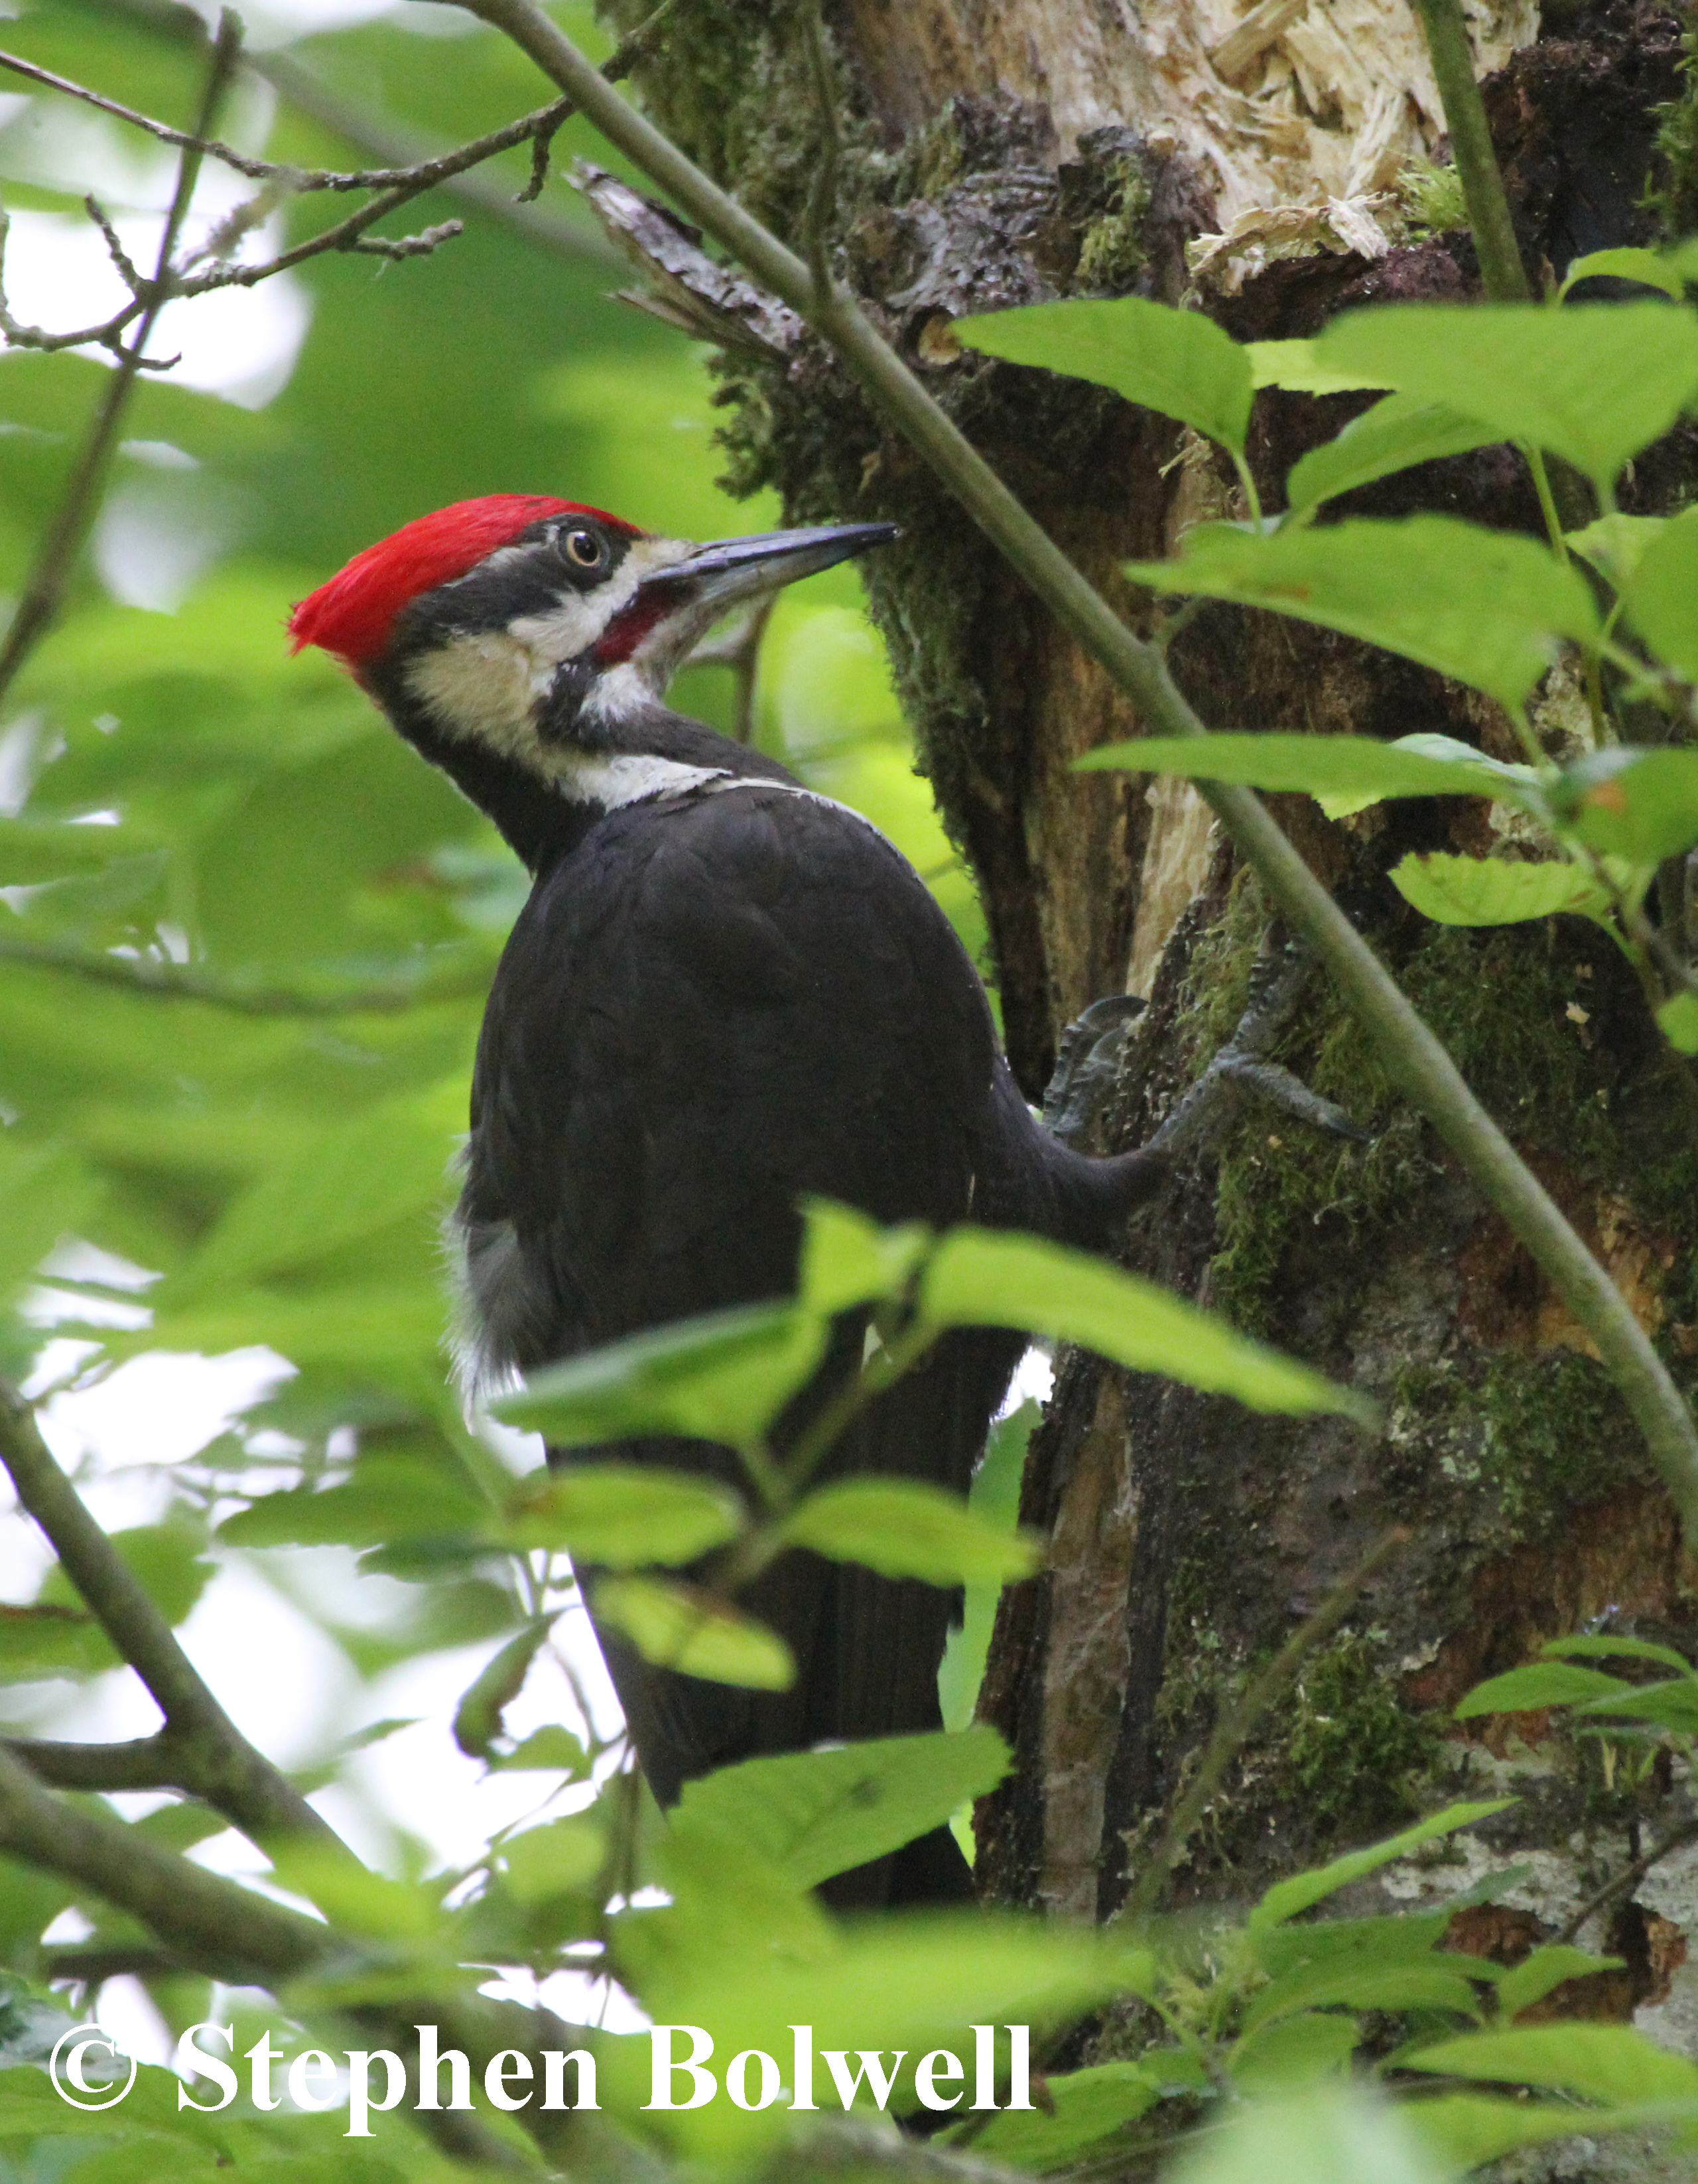 I didn't get the opportunity to observe pileted woodpeckers so easily before coming to Canada - these birds are a joy to observe as they hammer away at an old tree trunk, and there is a certain sadness in that I shall no longer be able to watch them so regularly in the local area.